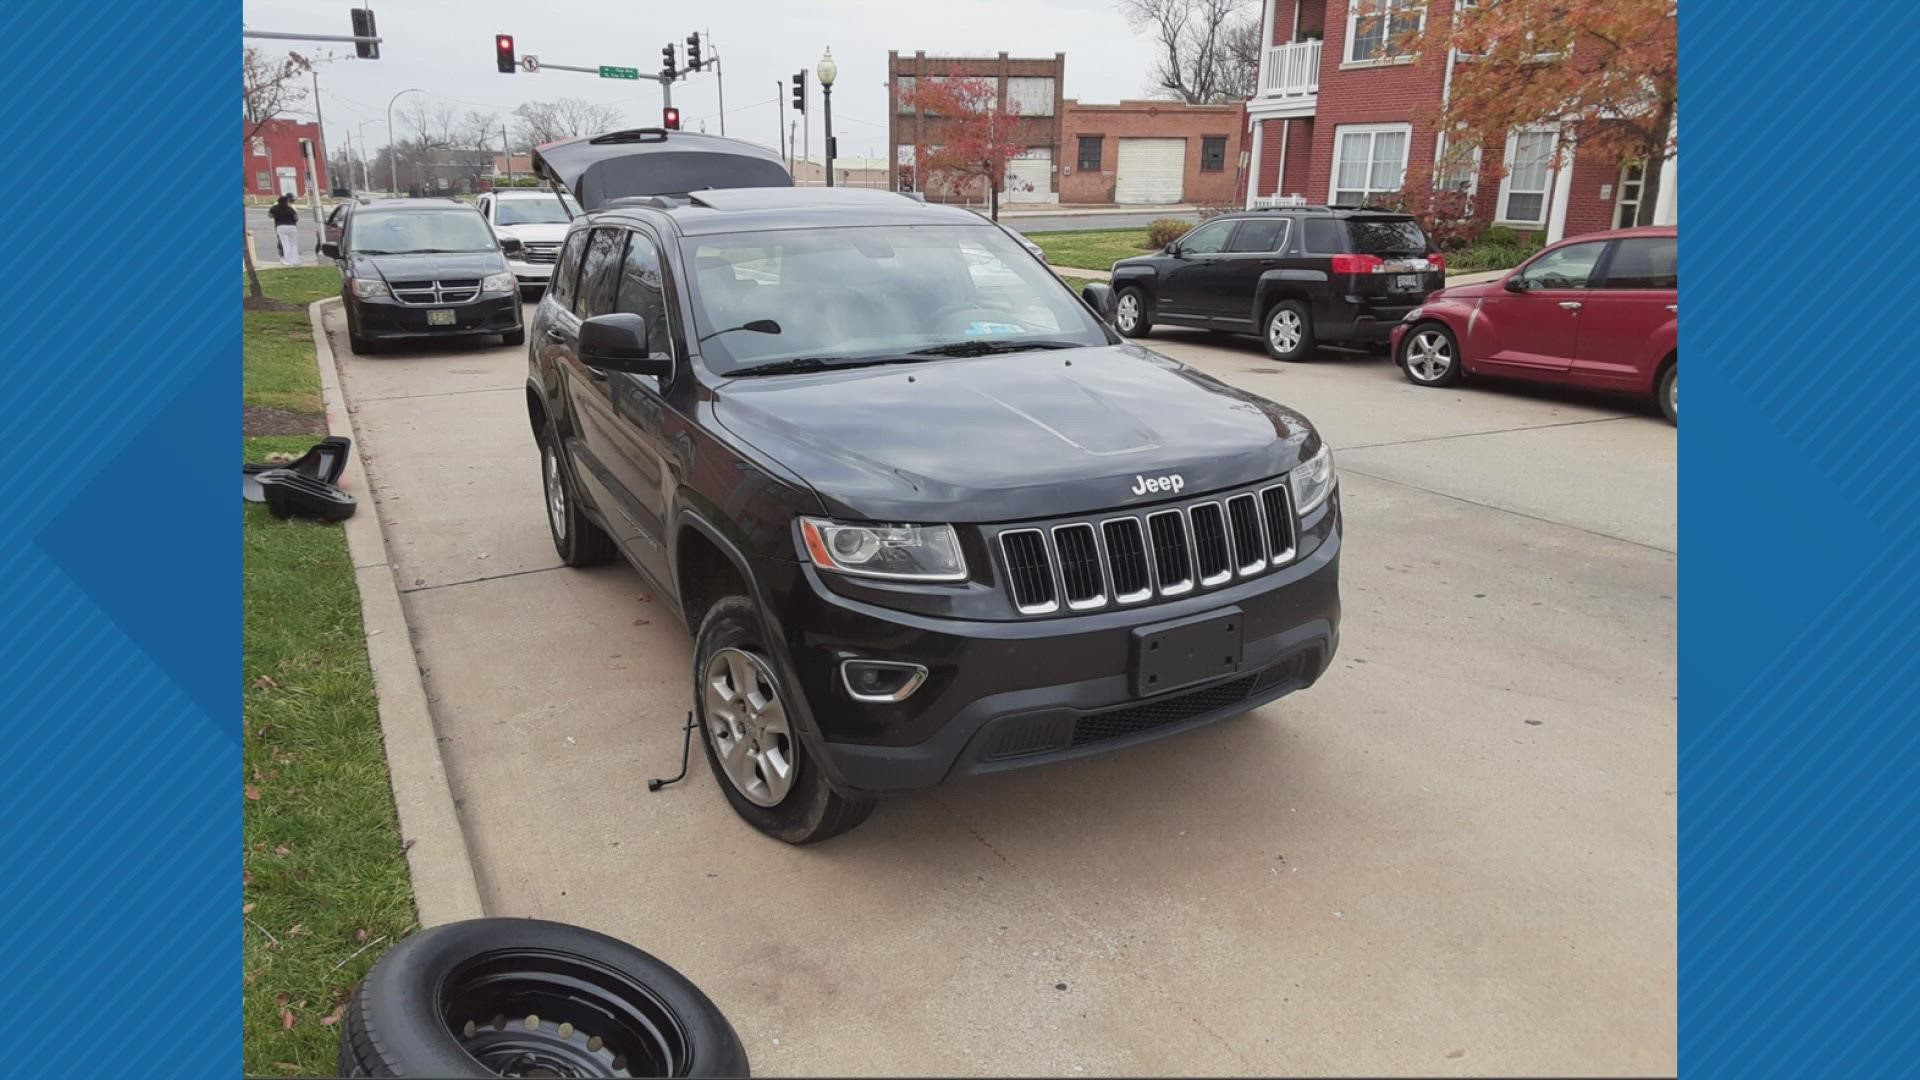 Early Saturday morning, a woman was warming up her SUV in north St. Louis, getting ready to take her son to work, when thieves stole it and her service dog.